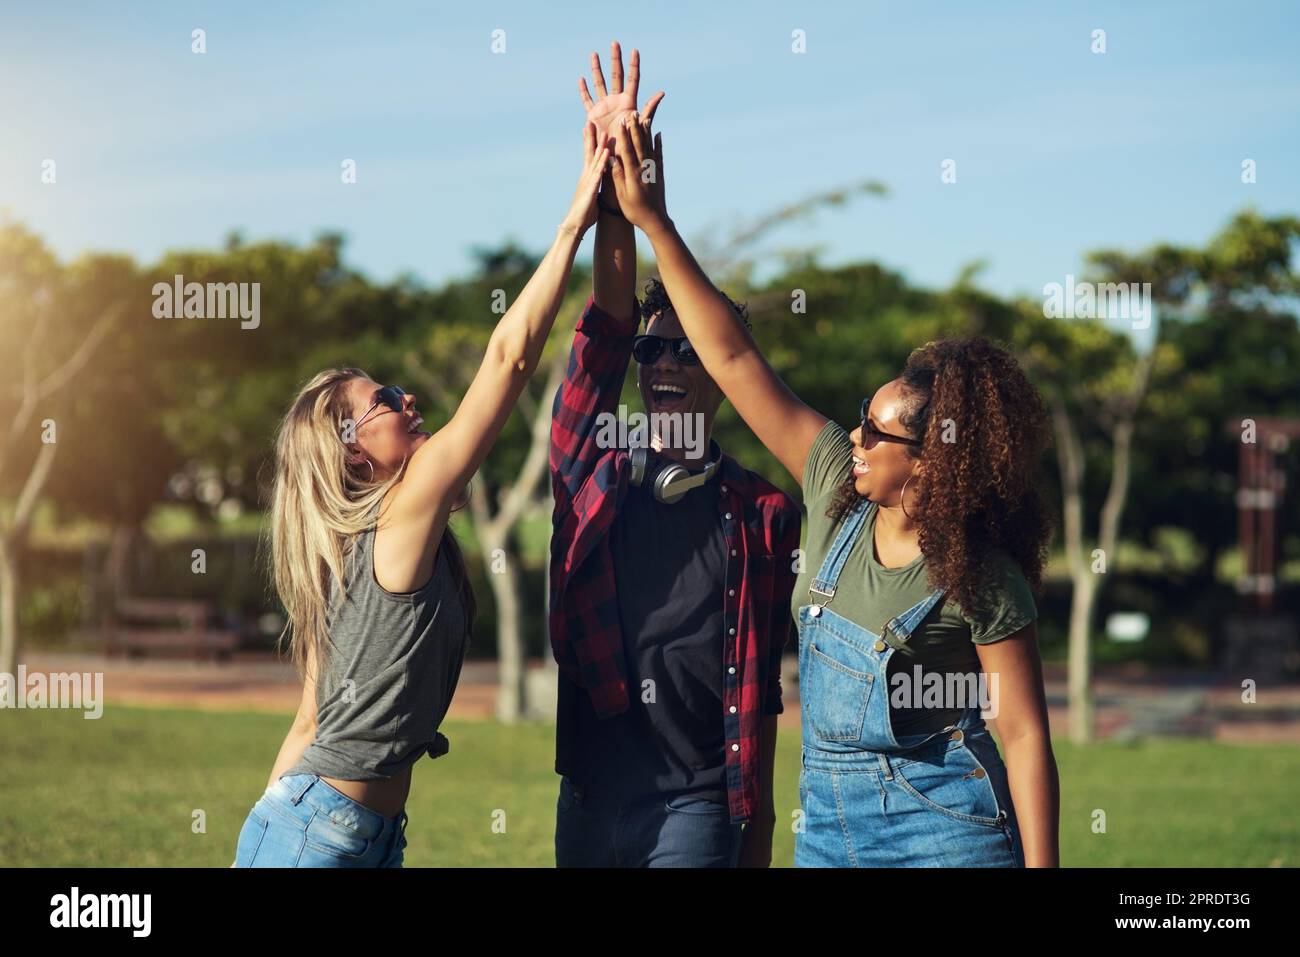 Lets get this day started. a group of cheerful young friends giving each other high fives outside in a park. Stock Photo